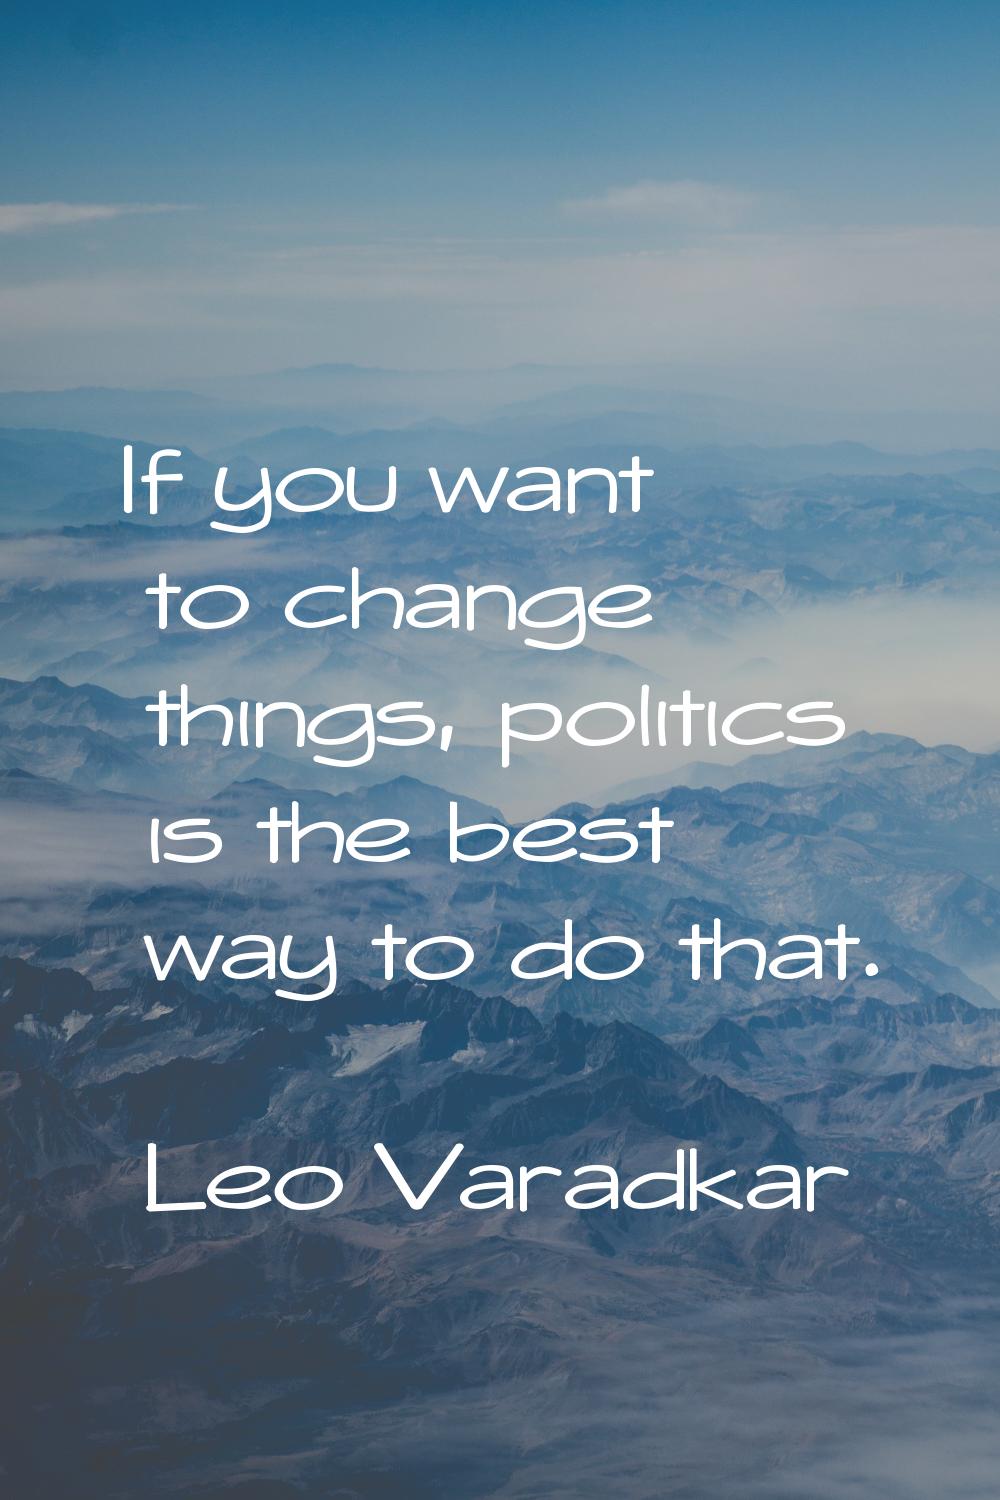 If you want to change things, politics is the best way to do that.